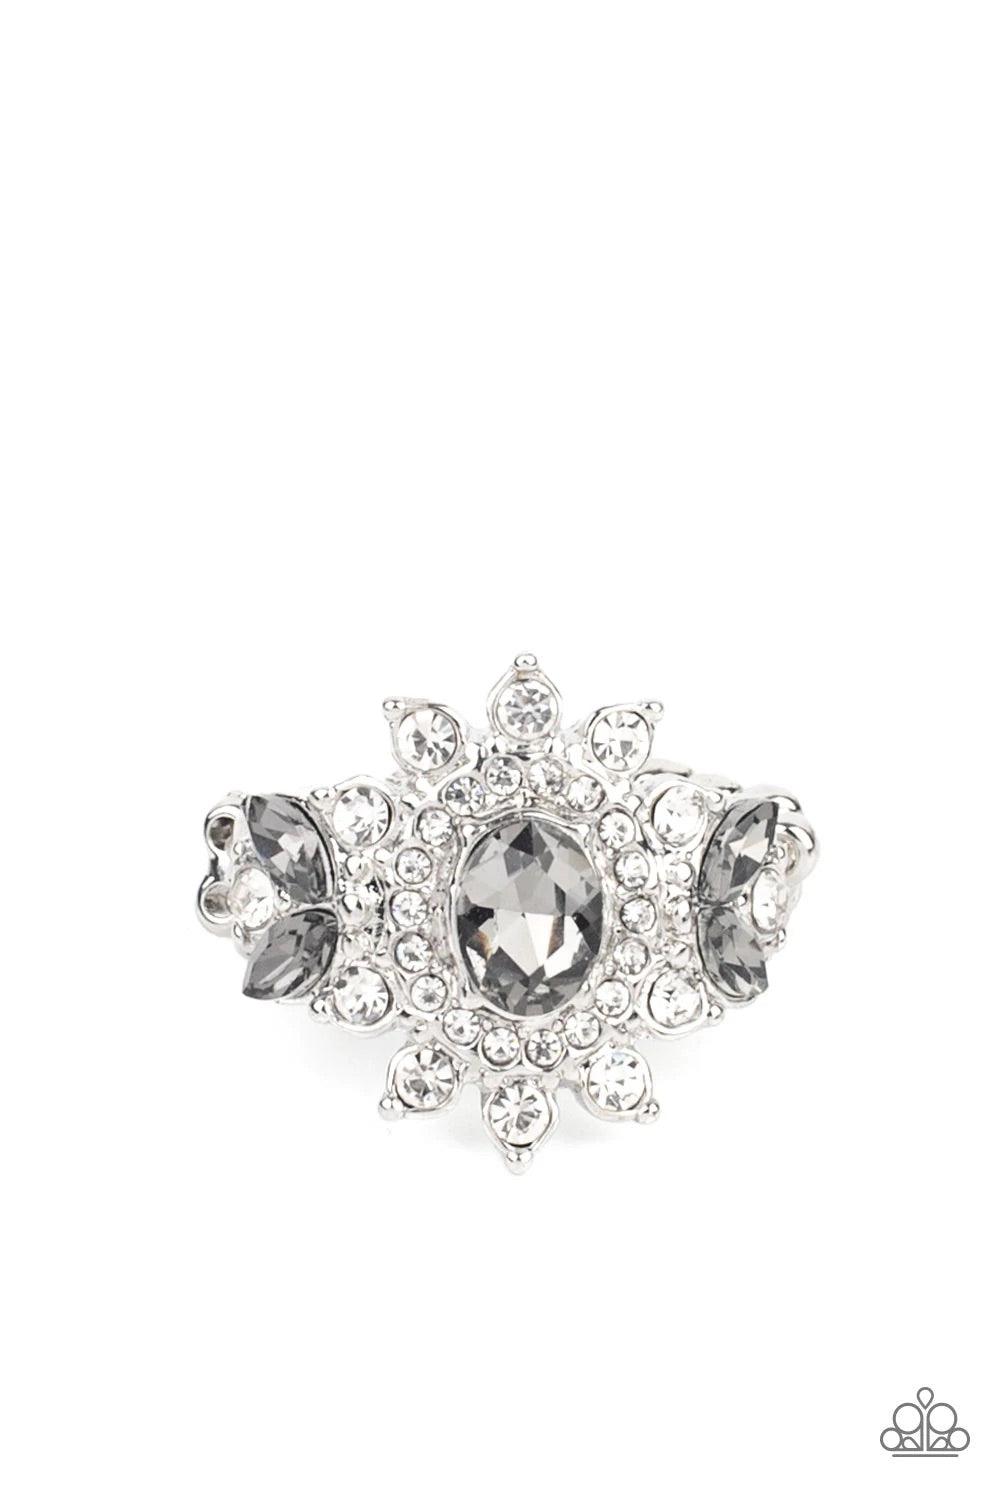 Paparazzi Accessories The Princess and the FROND - Silver Glassy white rhinestone petals flare out from an oval smoky rhinestone center. Dainty smoky marquise rhinestones embellish the sides of the glittery frame, adding regal leafy accents. Features a st